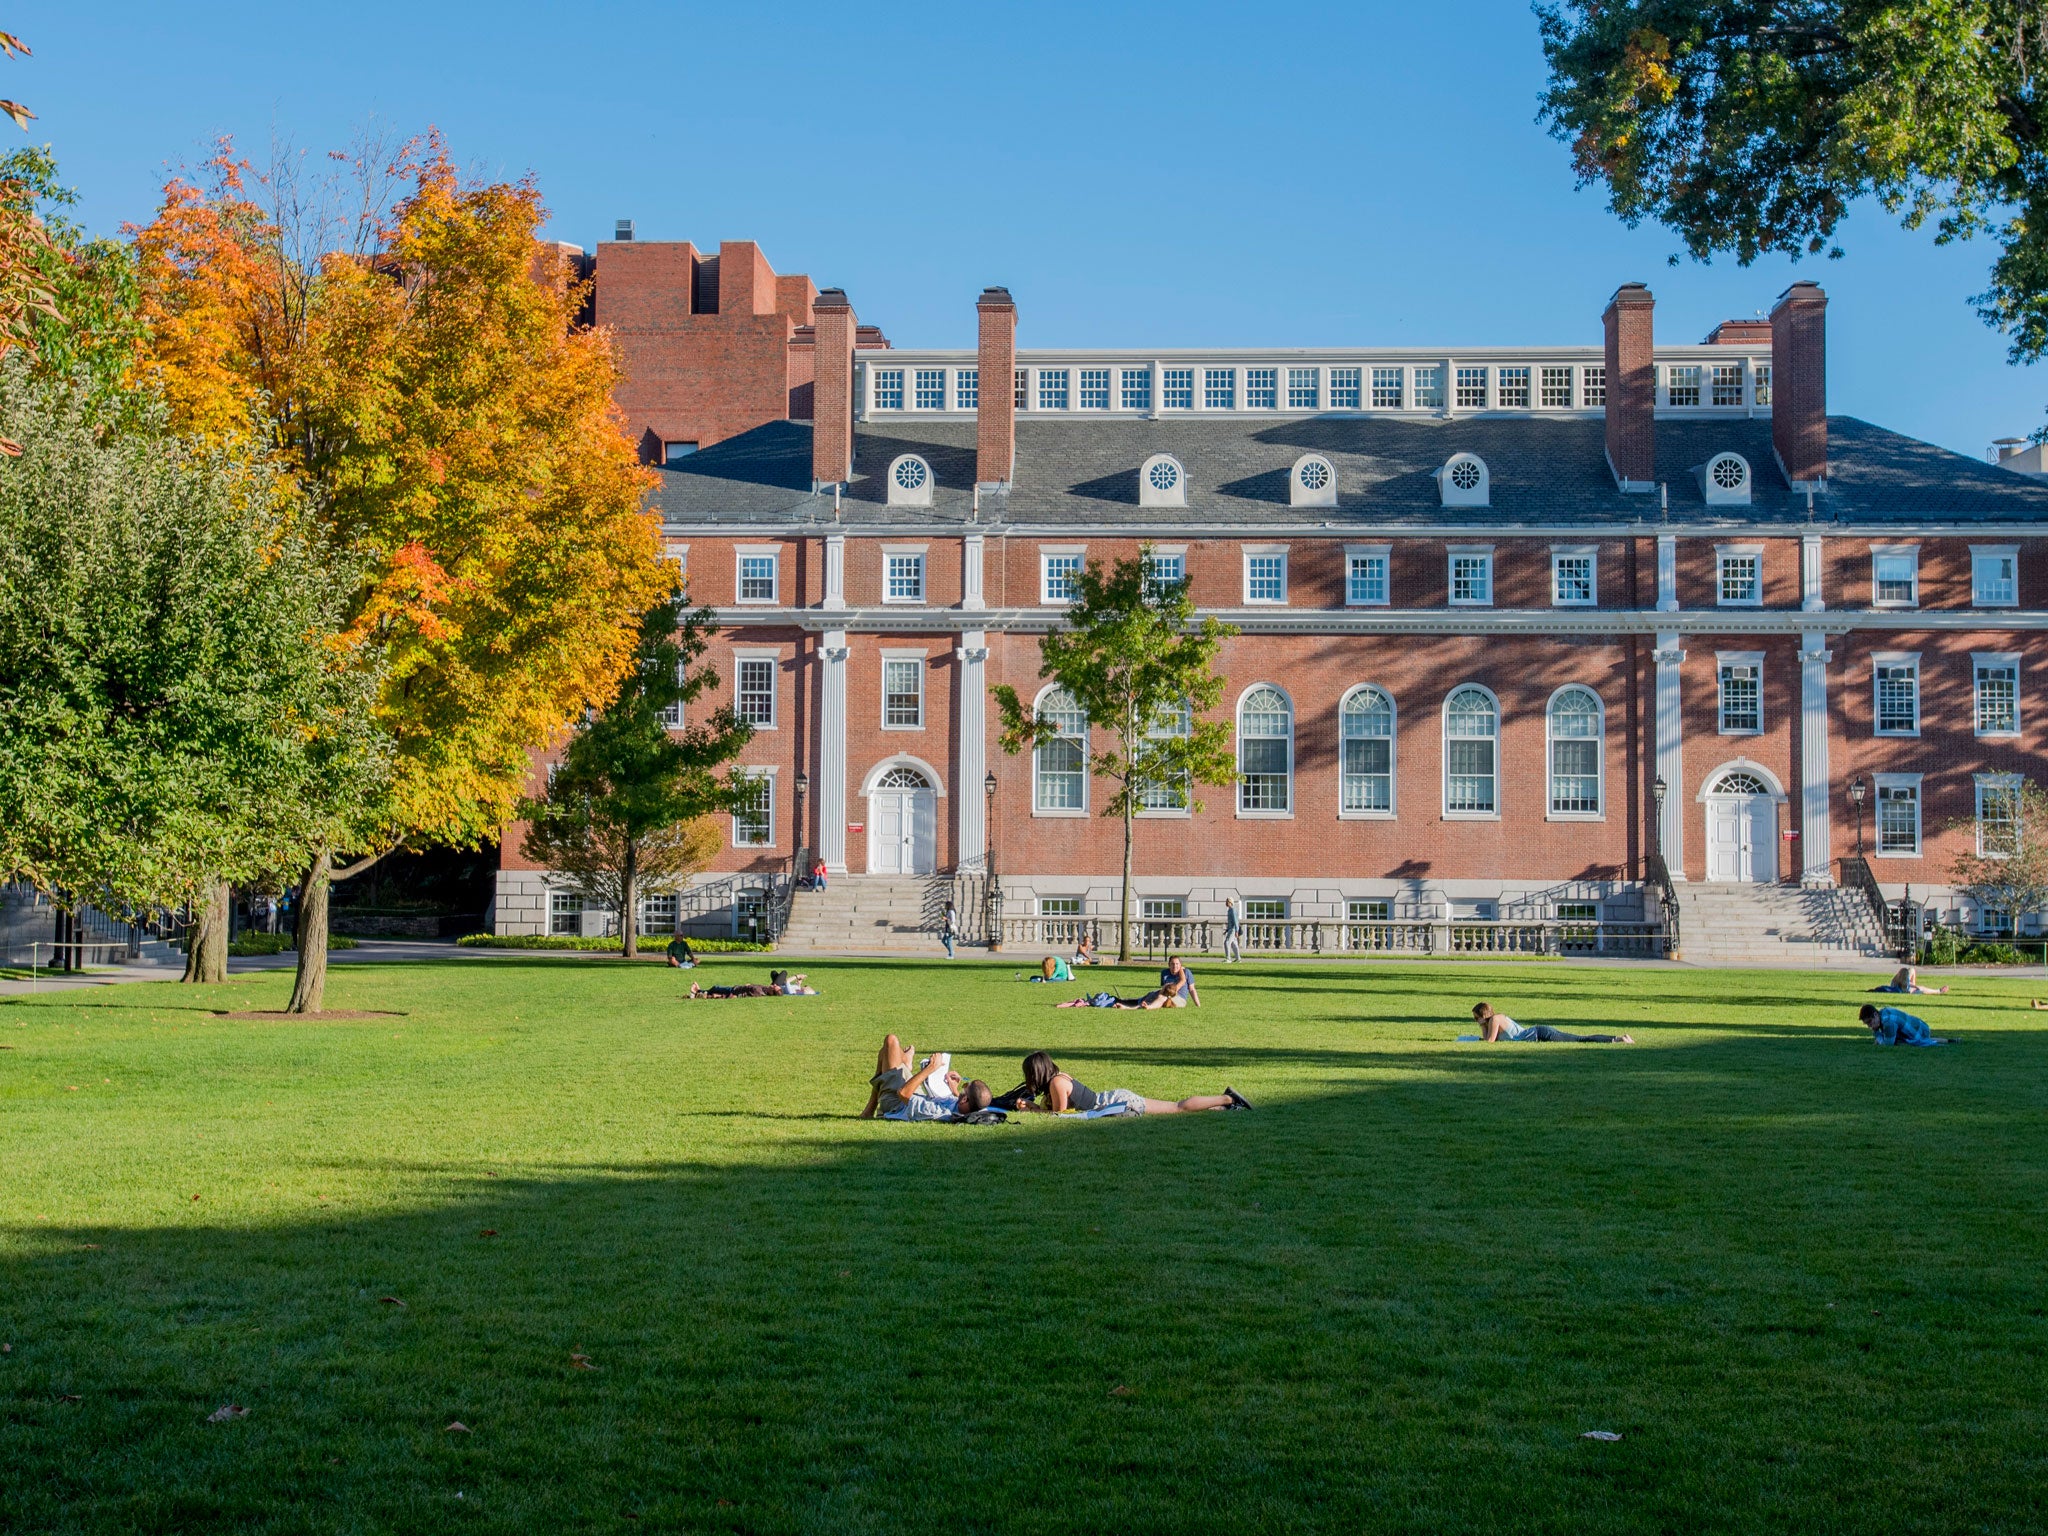 Students relax on the lawns around Harvard University in the US